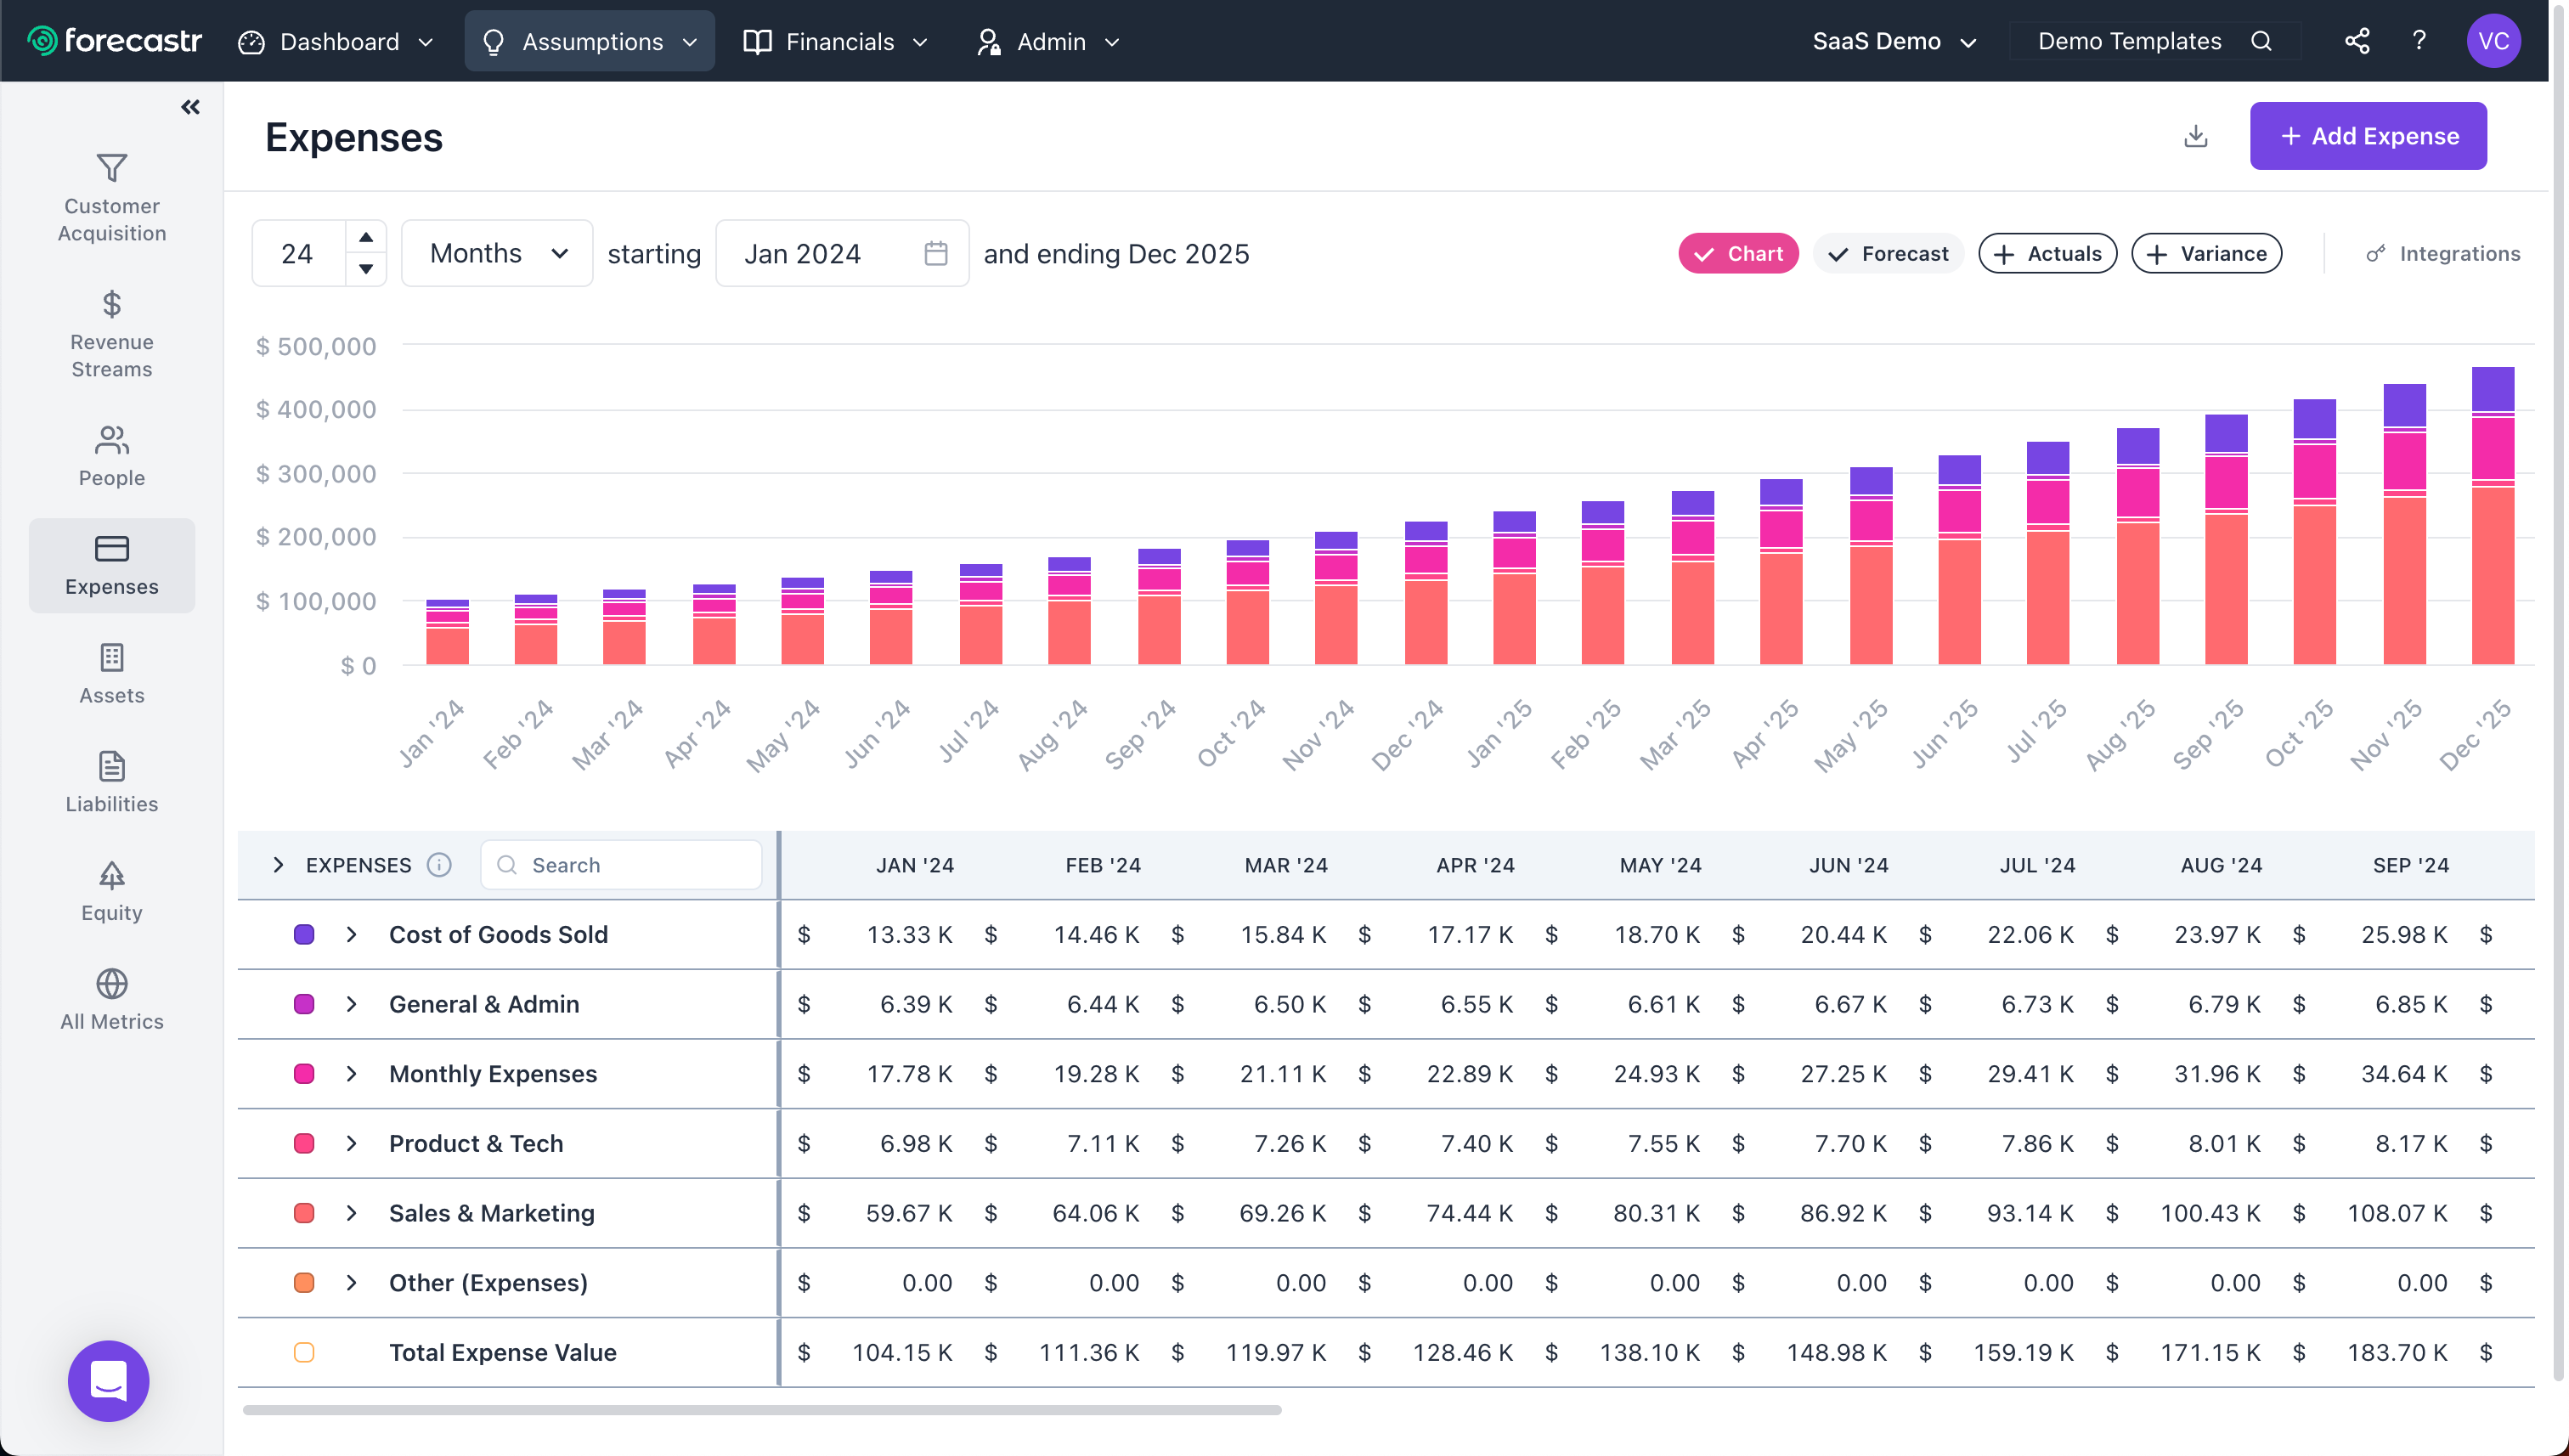 See how your expenses will scale as your business grows. Run alternate scenarios to see how different decisions impact your expenses over time.